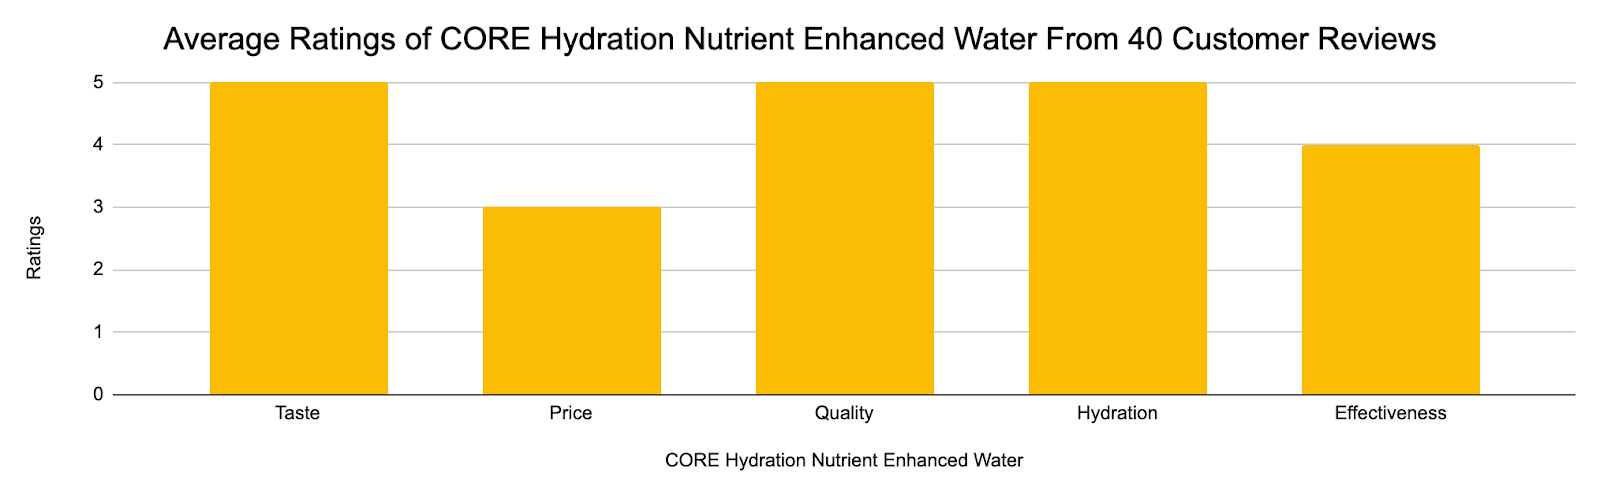 The image shows that Core Hydration nutrient enhanced water has an average rating of 4.5 stars out of 5, based on 40 customer reviews.
